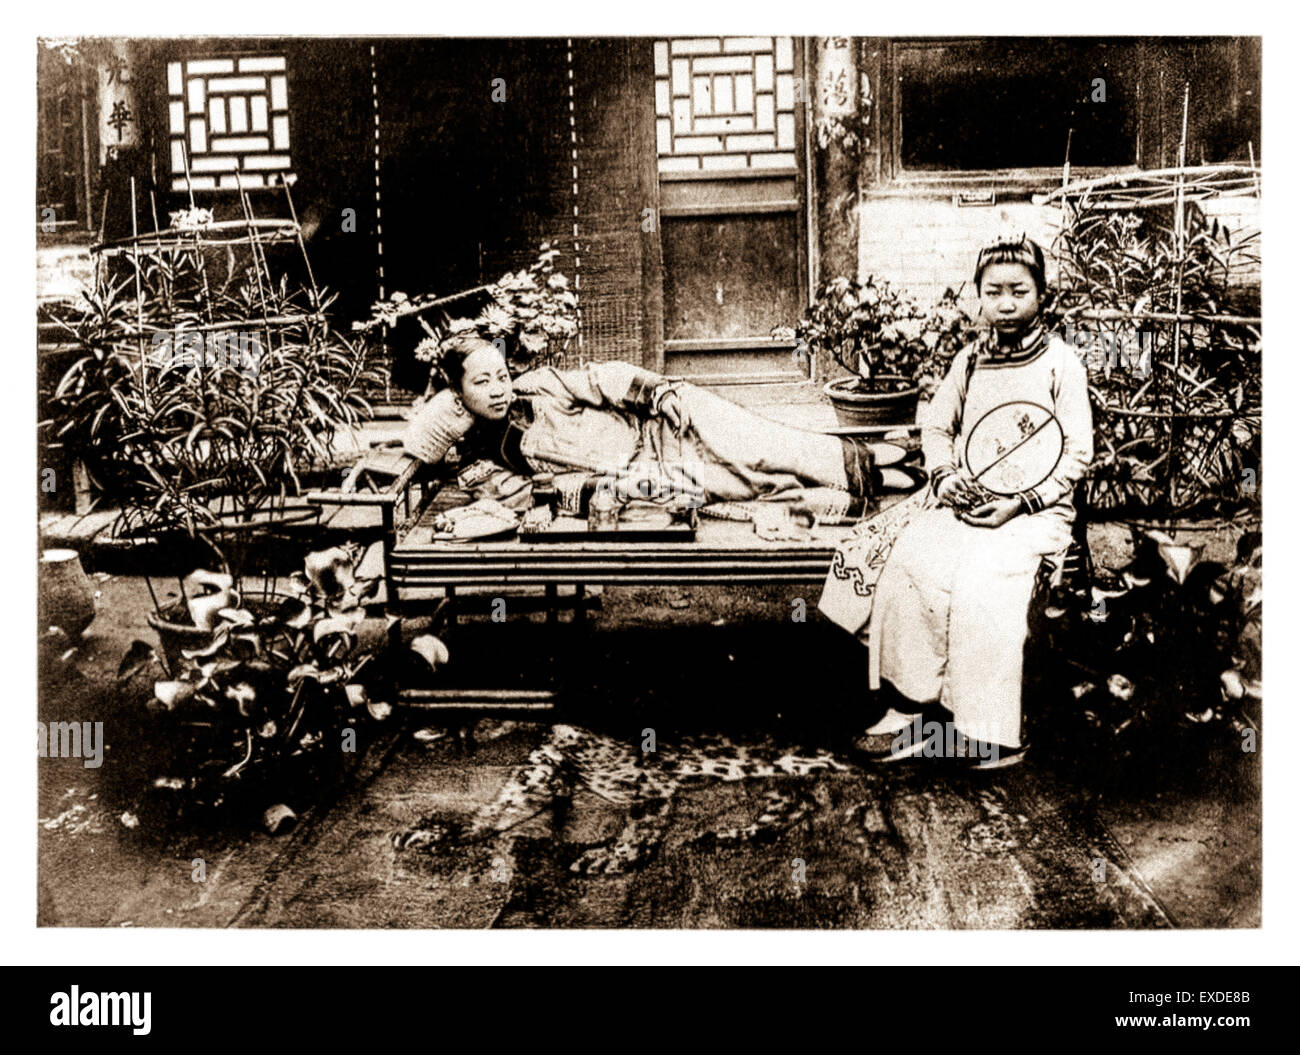 'A Manchurian lady smoking opium', taken before 1909.  A wealthy lady reclining on an opium bed in a courtyard holds an opium pipe and 'yen hock' (opium needle). In front of her is a tray holding the other paraphernalia associated with opium smoking. To her left an attendant holding a fan. See description for more information. Stock Photo